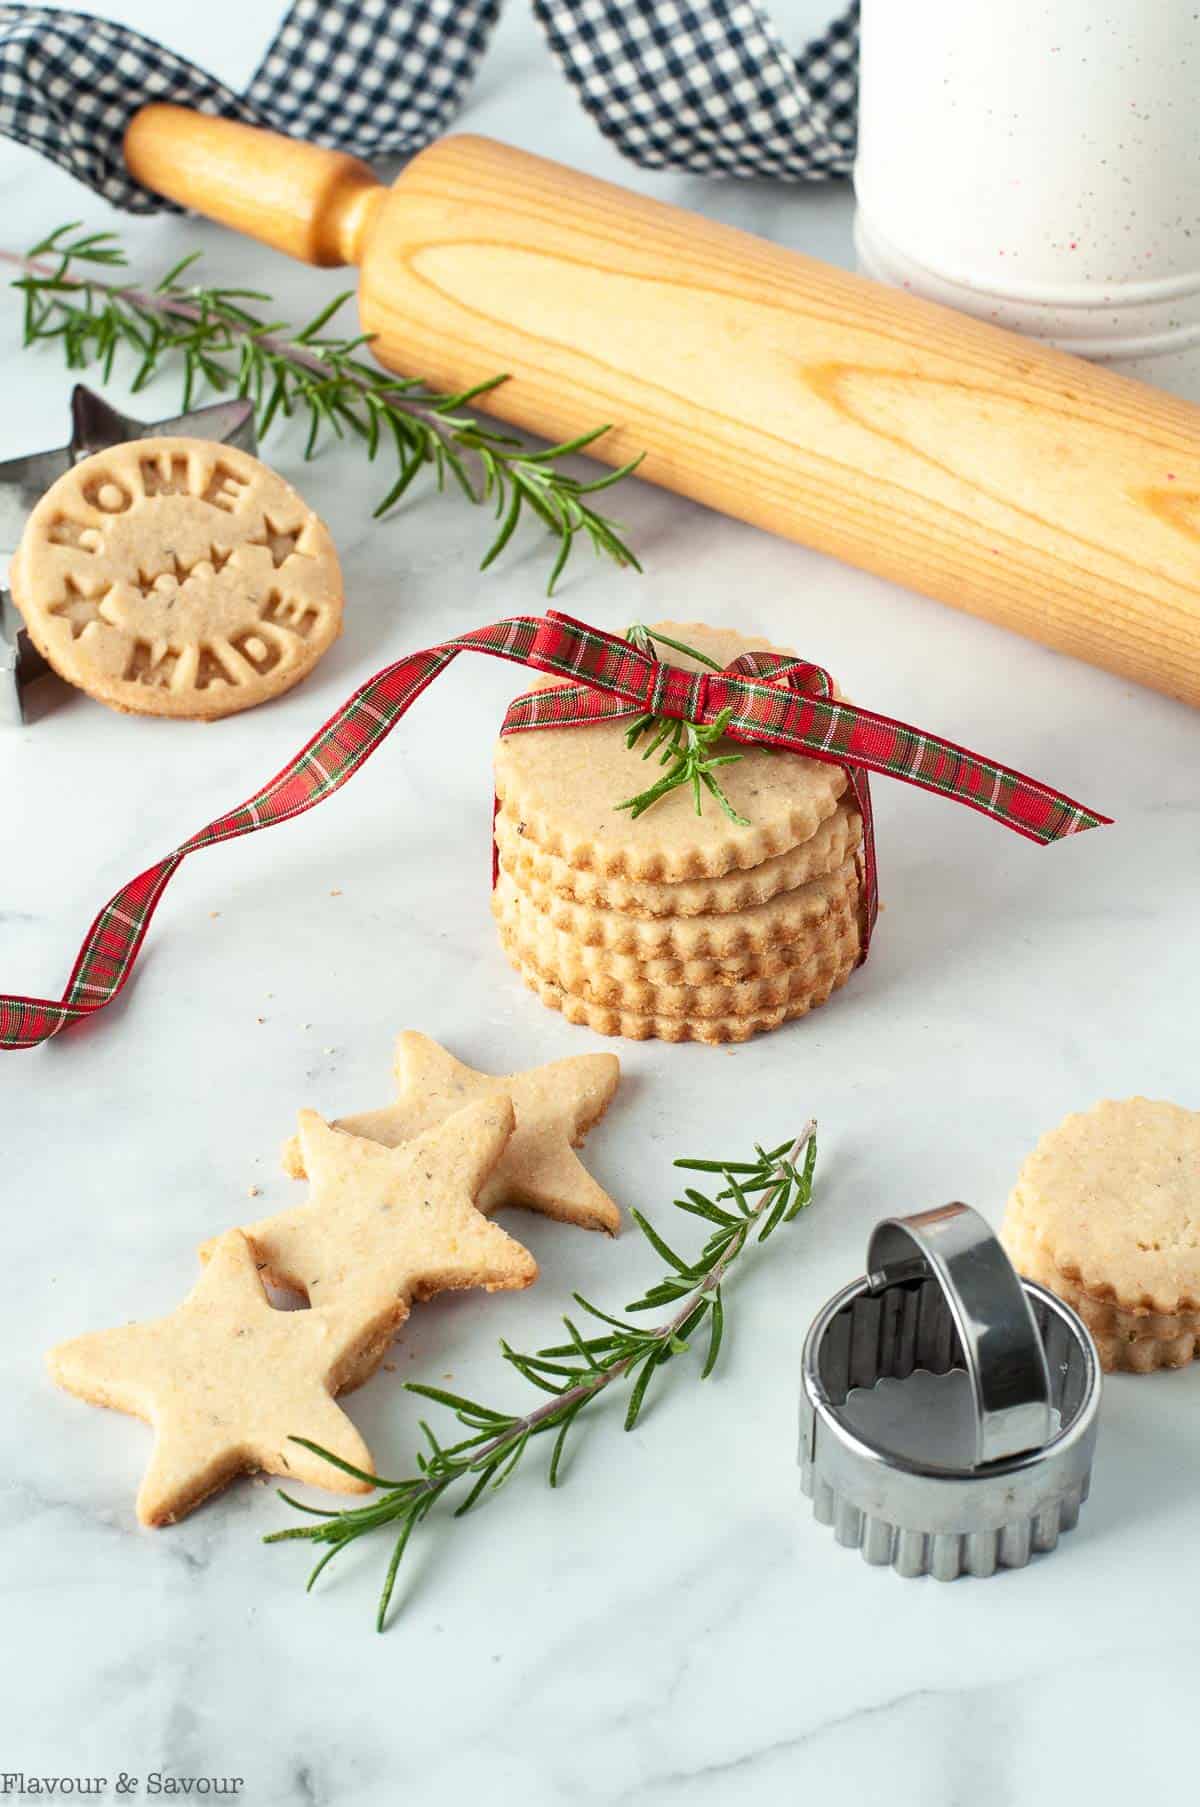 Rosemary Shortbread Cookies and stars with rosemary sprigs